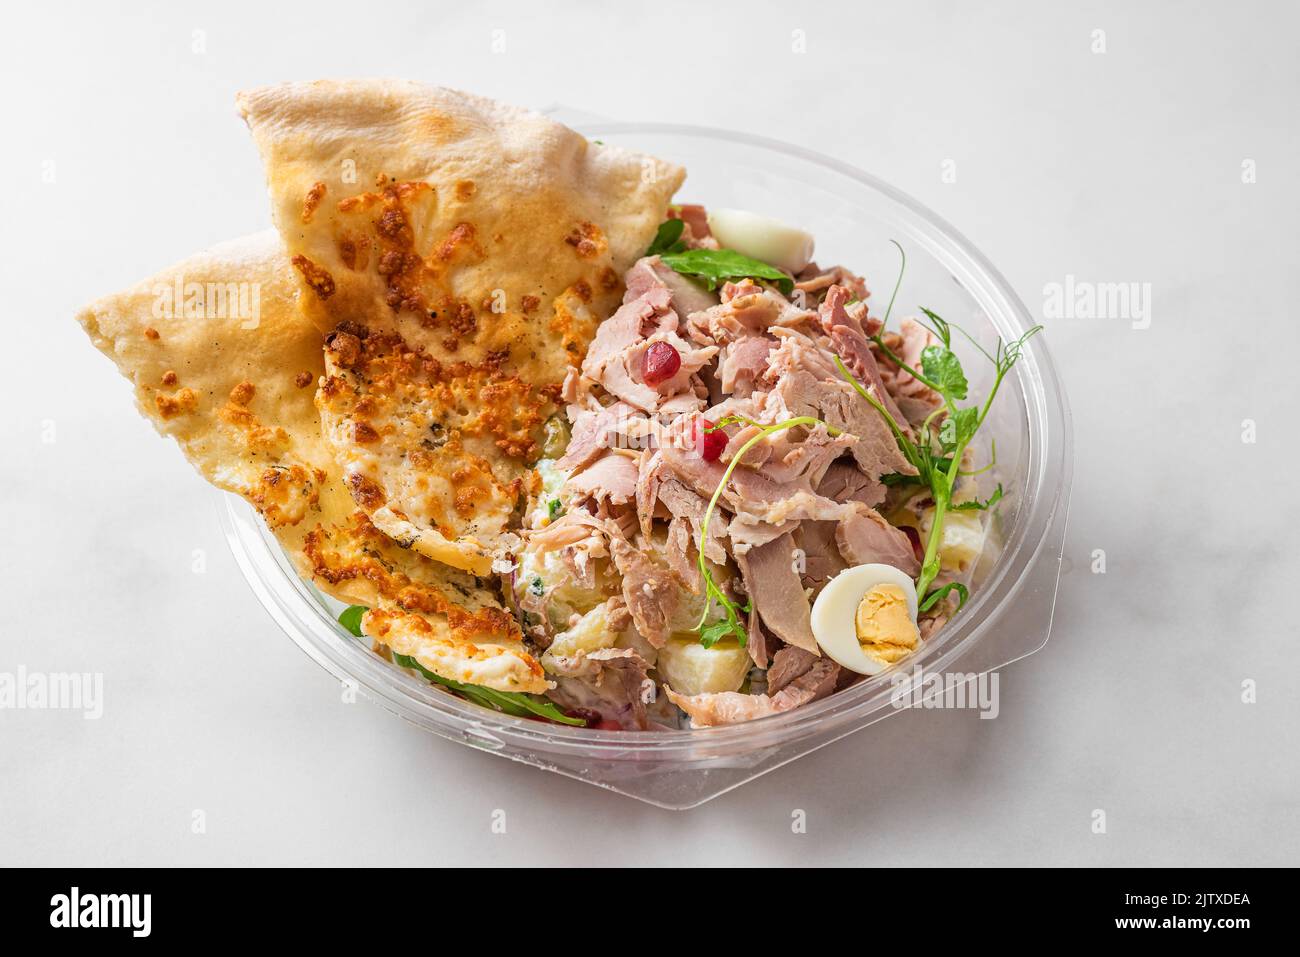 Healthy baked ham salad with arugula, crust bread toast, pomegranate in plastic package container for take away. Food in lunch box Stock Photo